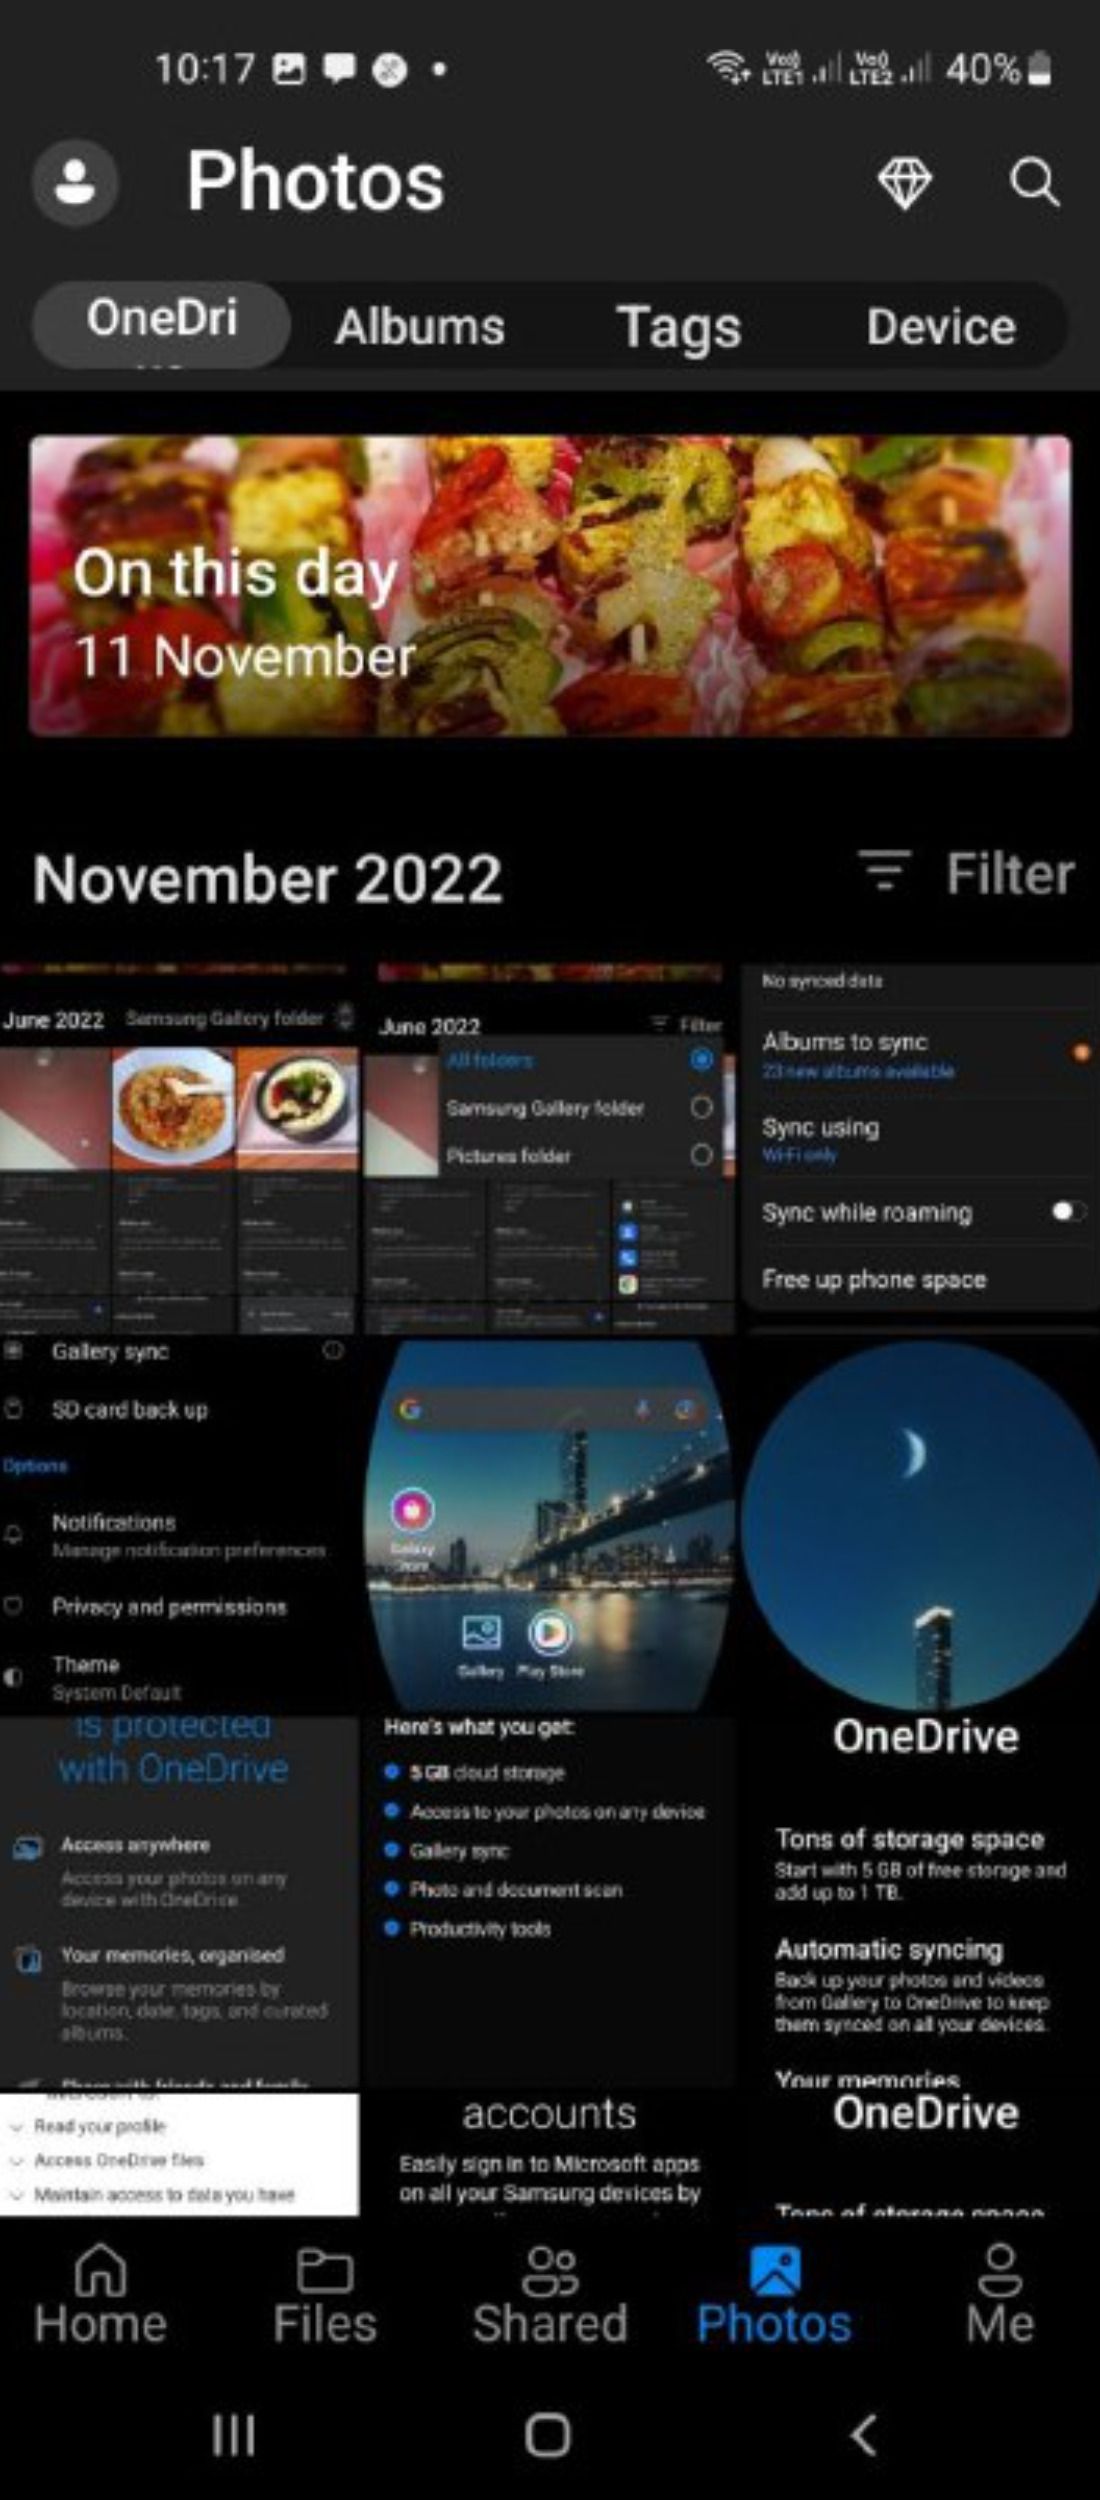 View photos in OneDrive